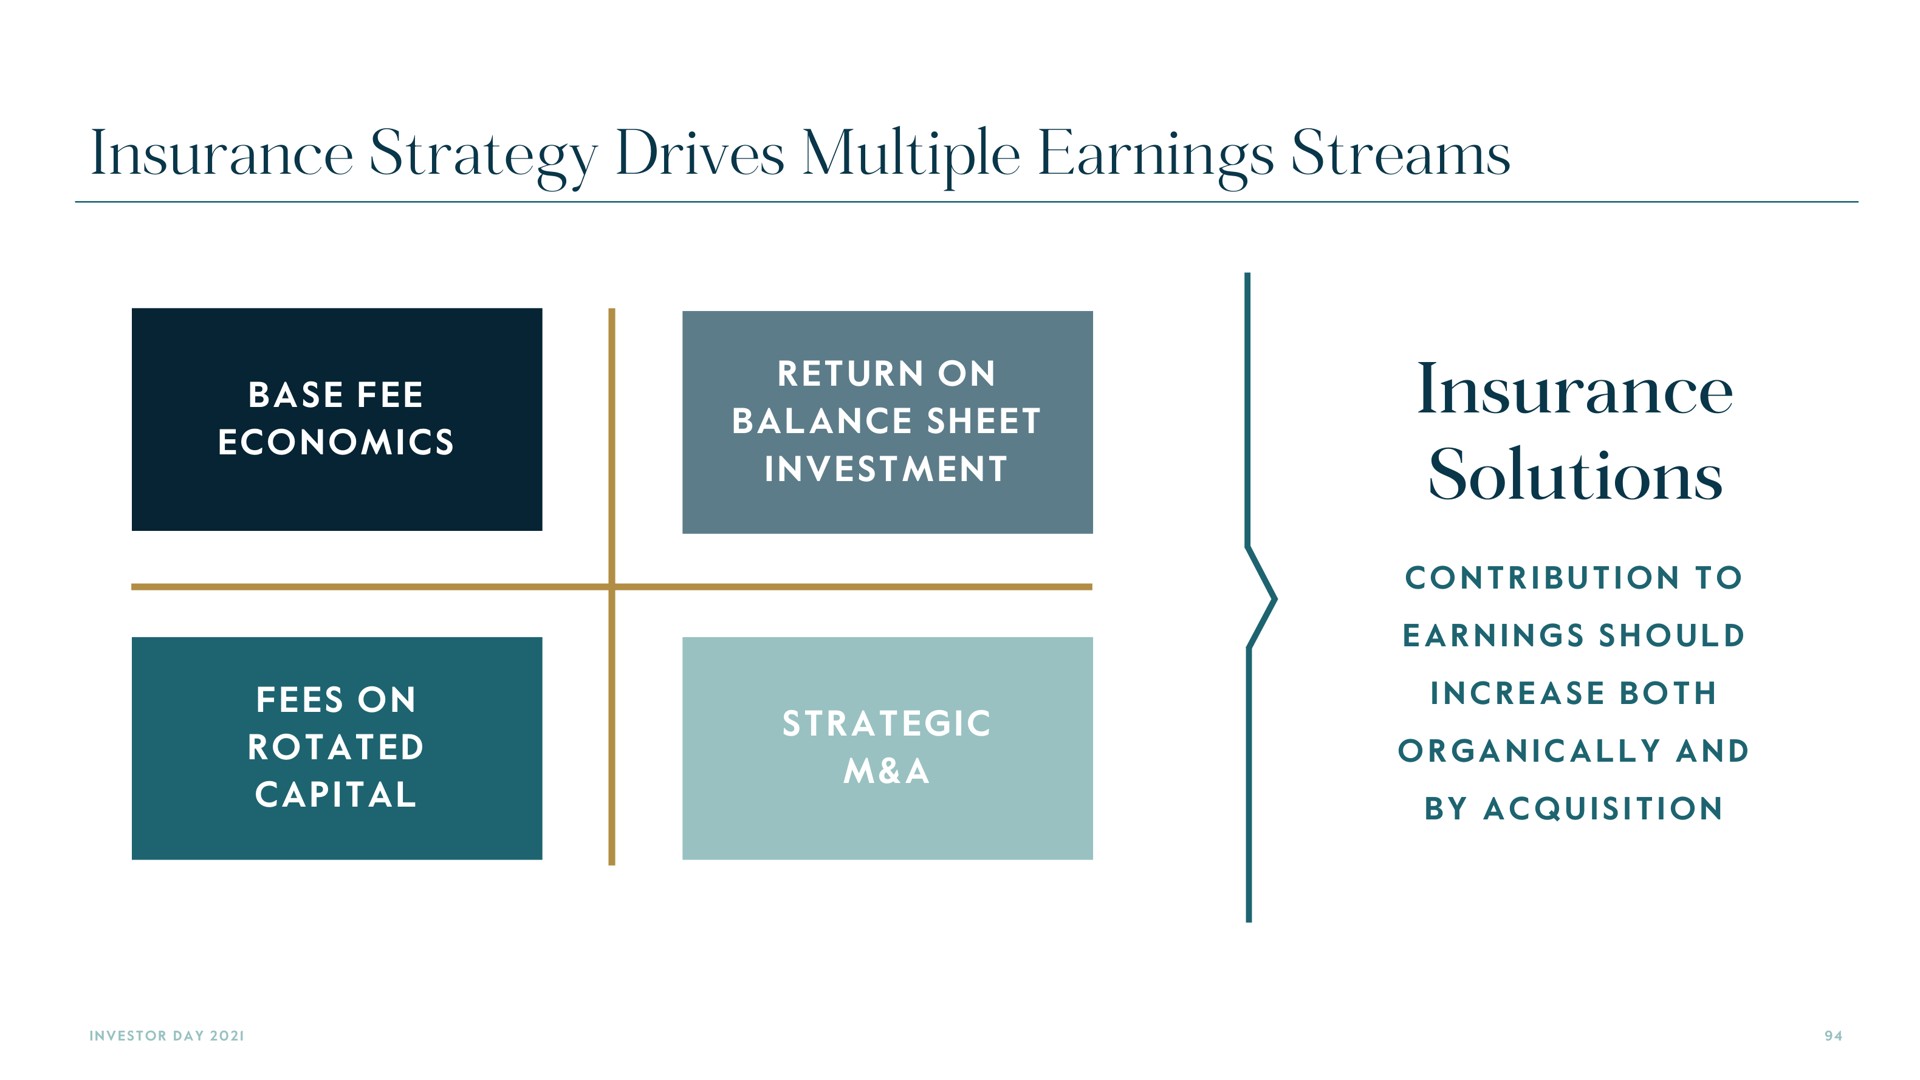 insurance solutions strategy drives multiple earnings streams | Carlyle